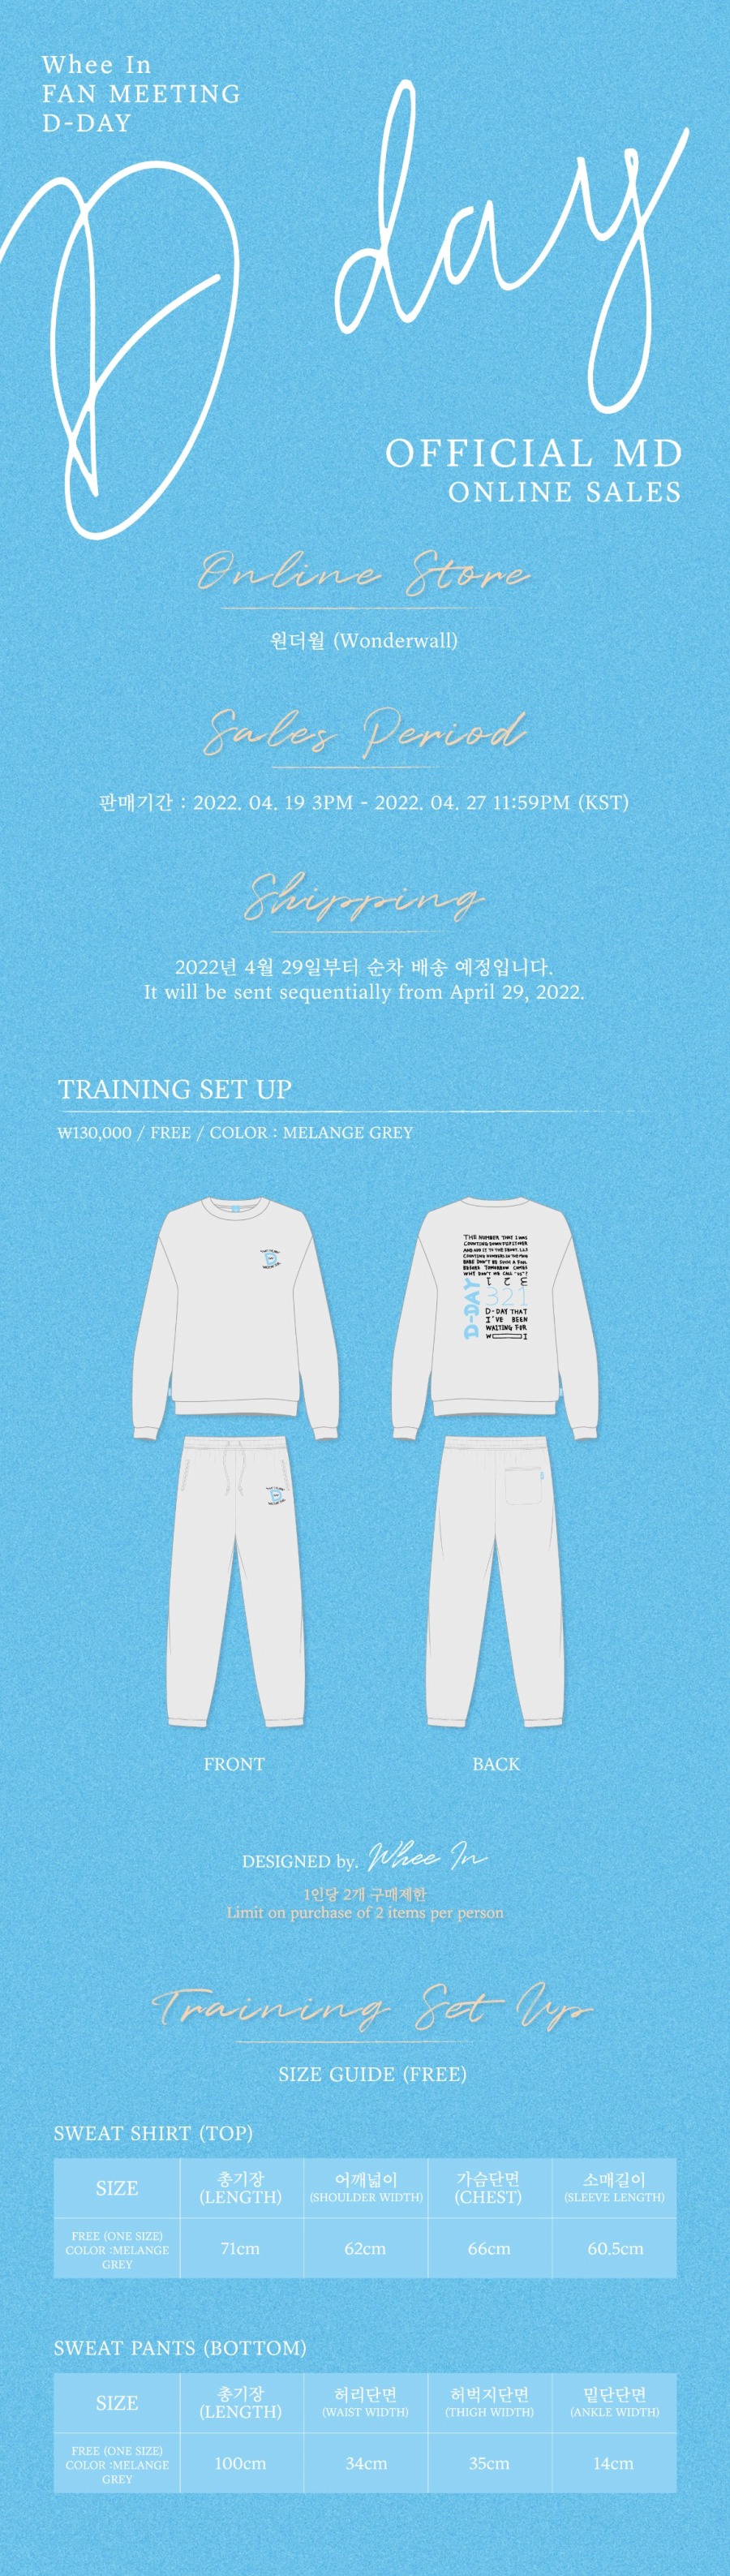 220415.2022 WHEE IN FANMEETING [D-DAY] OFFICIAL MD ONLINE SALES 1.jpg